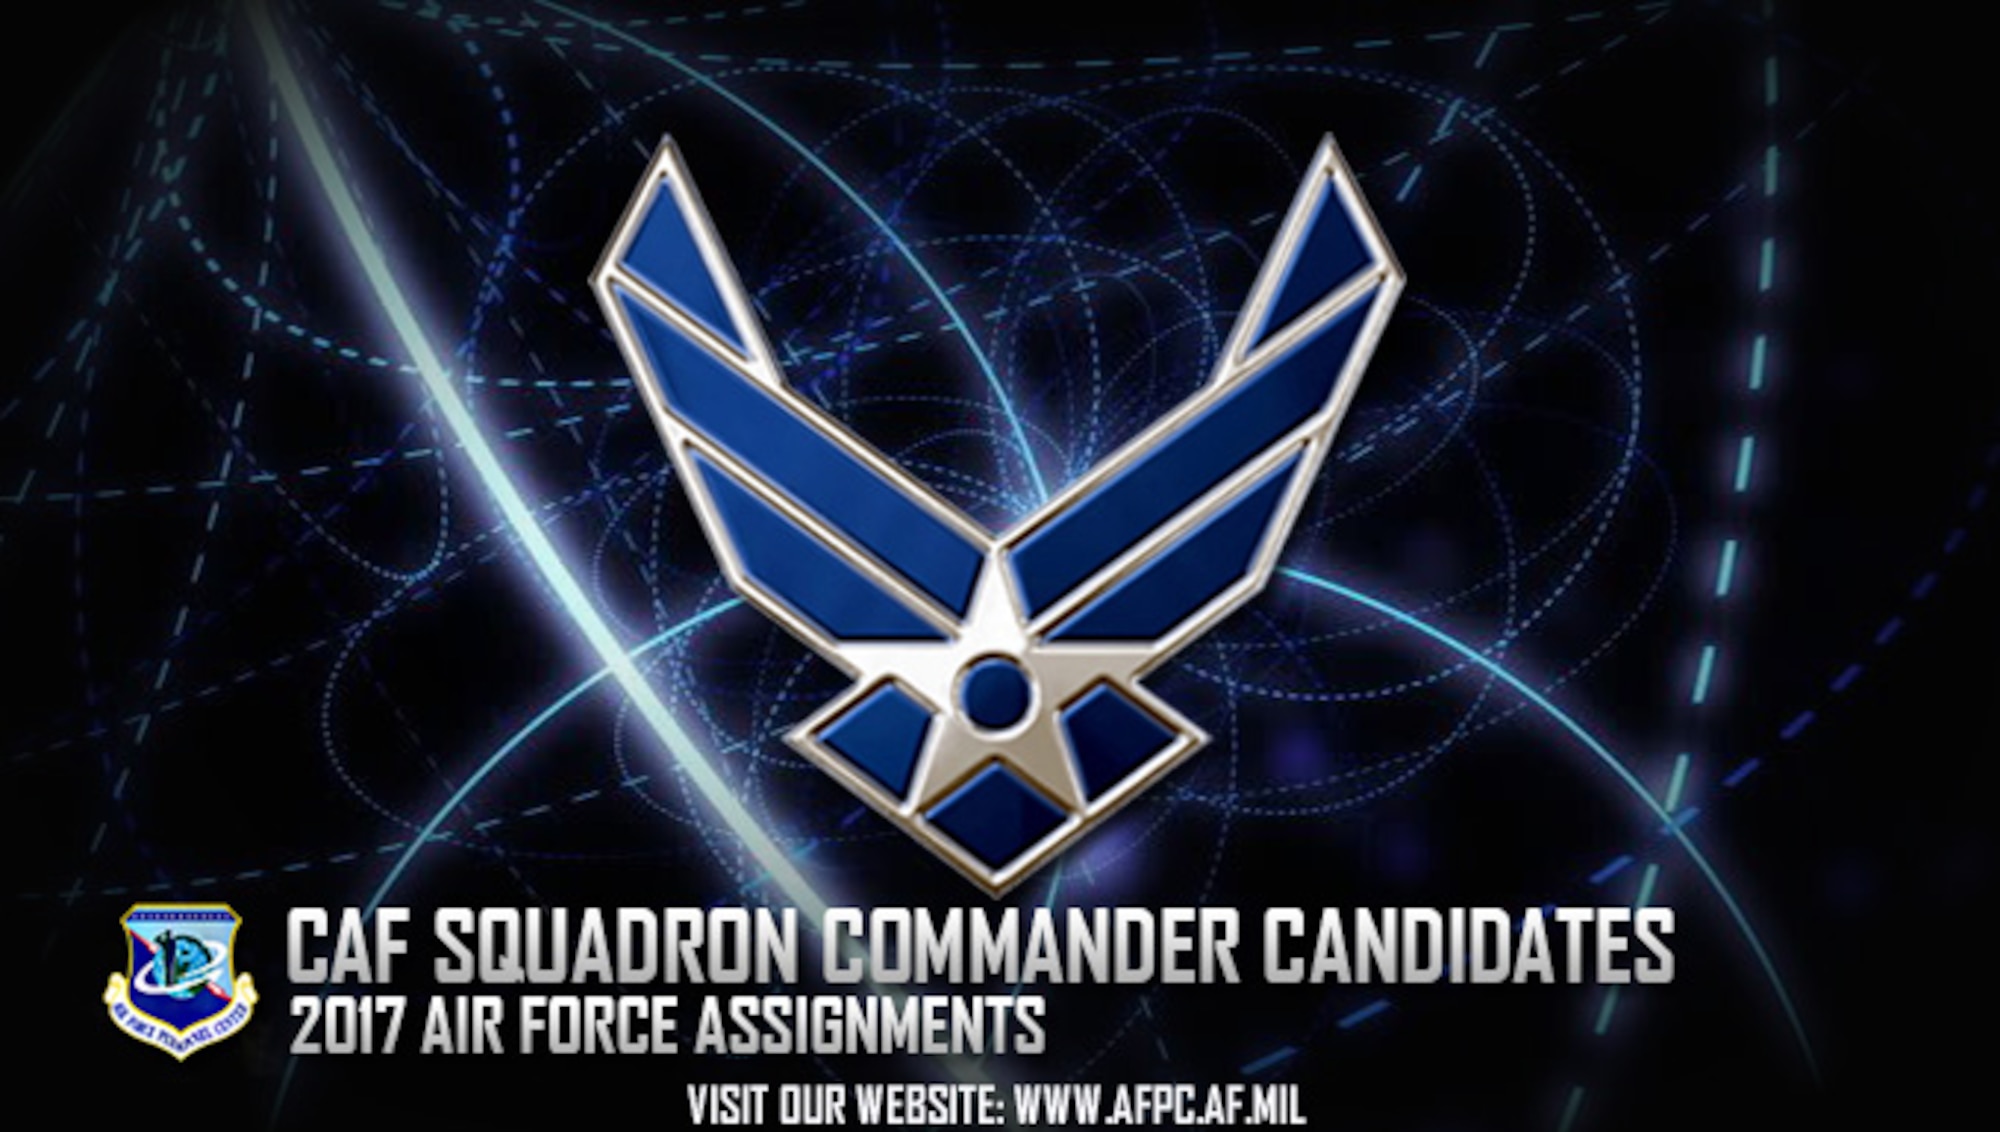 The Combat Air Forces development team selected 302 officers as CAF squadron commander candidates for 2017. Projected command vacancies include worldwide command and 365-day extended deployment command opportunities. (U.S. Air Force graphic by Staff Sgt. Alexx Pons)